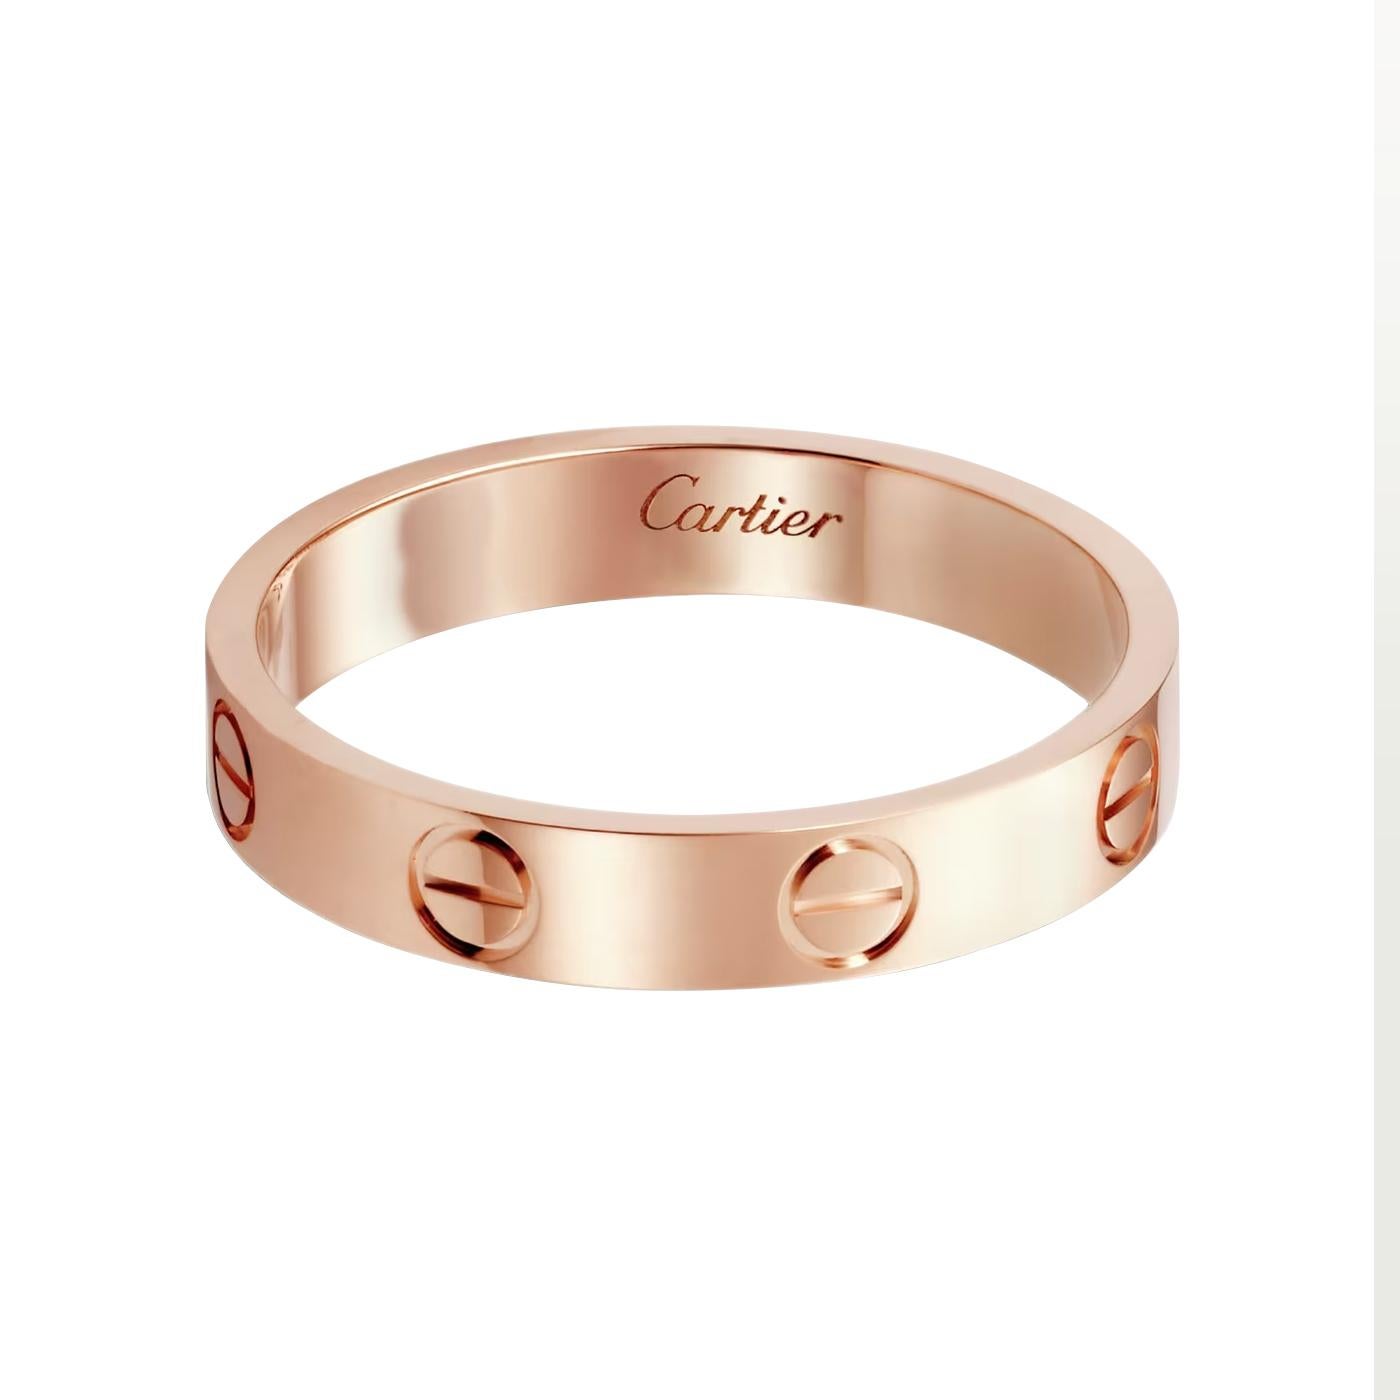 LOVE wedding band, rose gold (750/1000). Width: 3.6 mm (for size 56).

Details:
Brand: Cartier
Type: Love
Material: Rose Gold
Size: 56
Theme: Romantic, Love
Scope of Delivery: Box and Papers
Purchased Date: 2021
Occasion: Anniversary, Birthday,